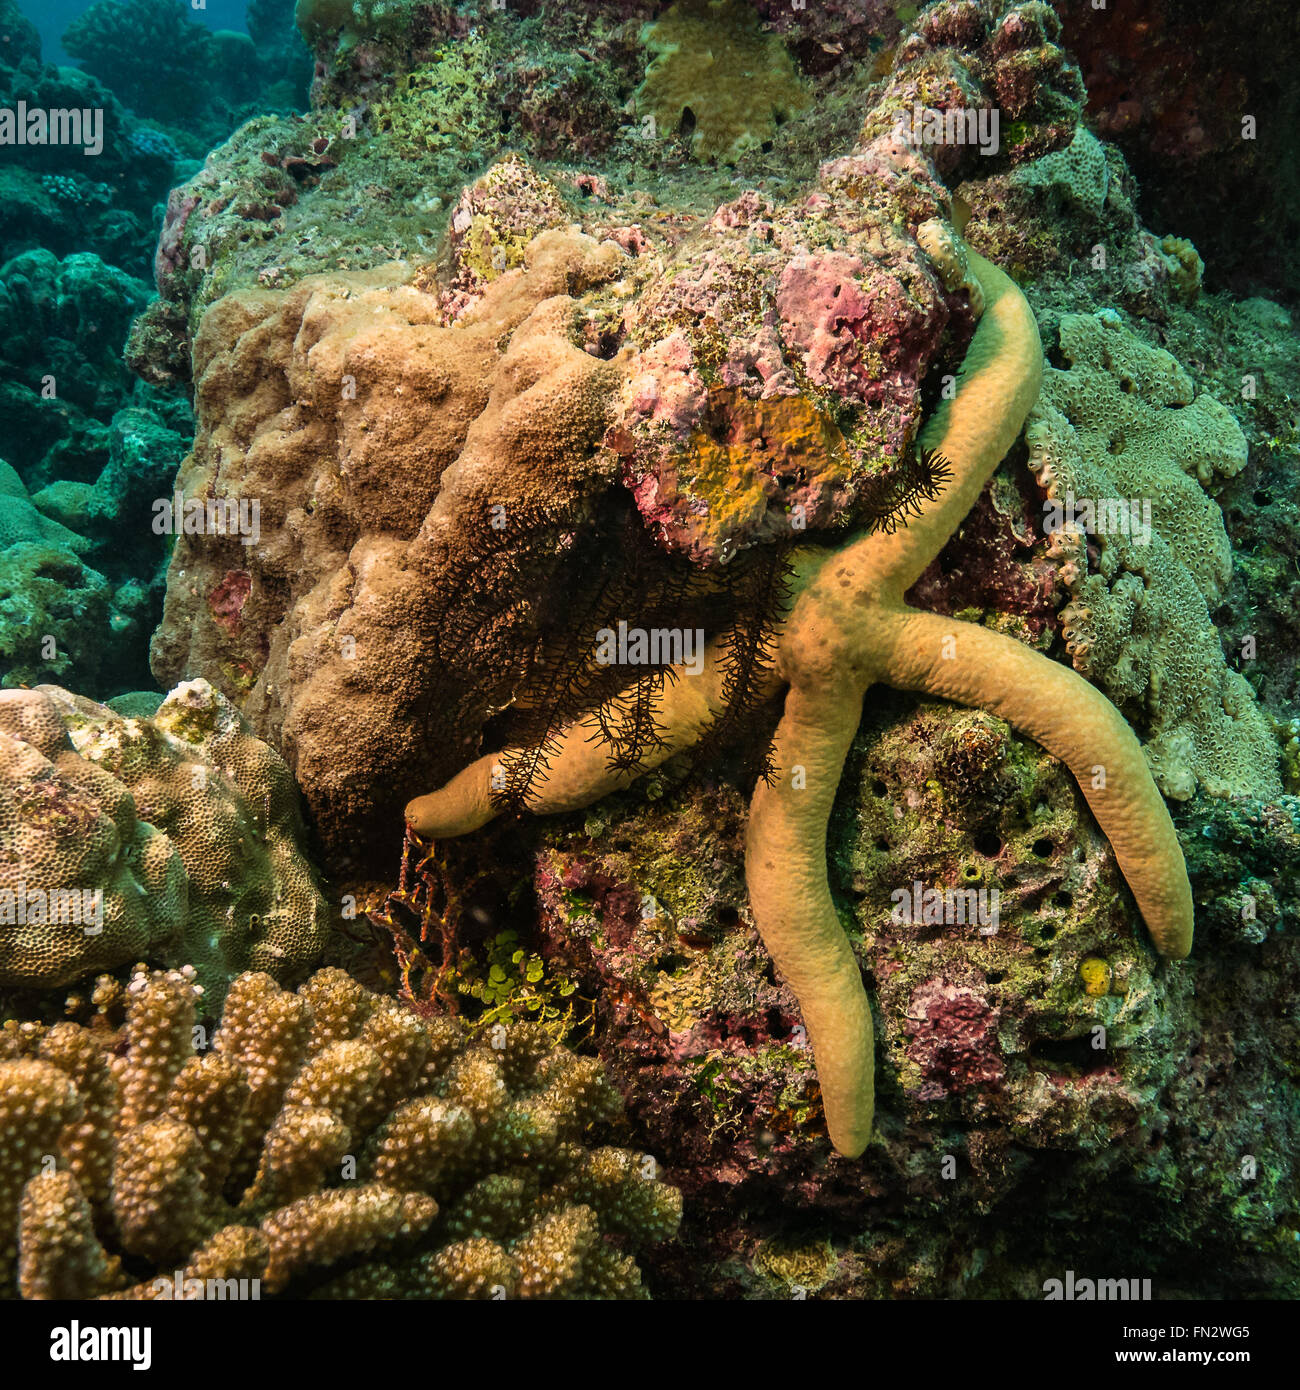 A starfish wraps its arms round a coral outcrop on a tropical reef in the Maldives Stock Photo